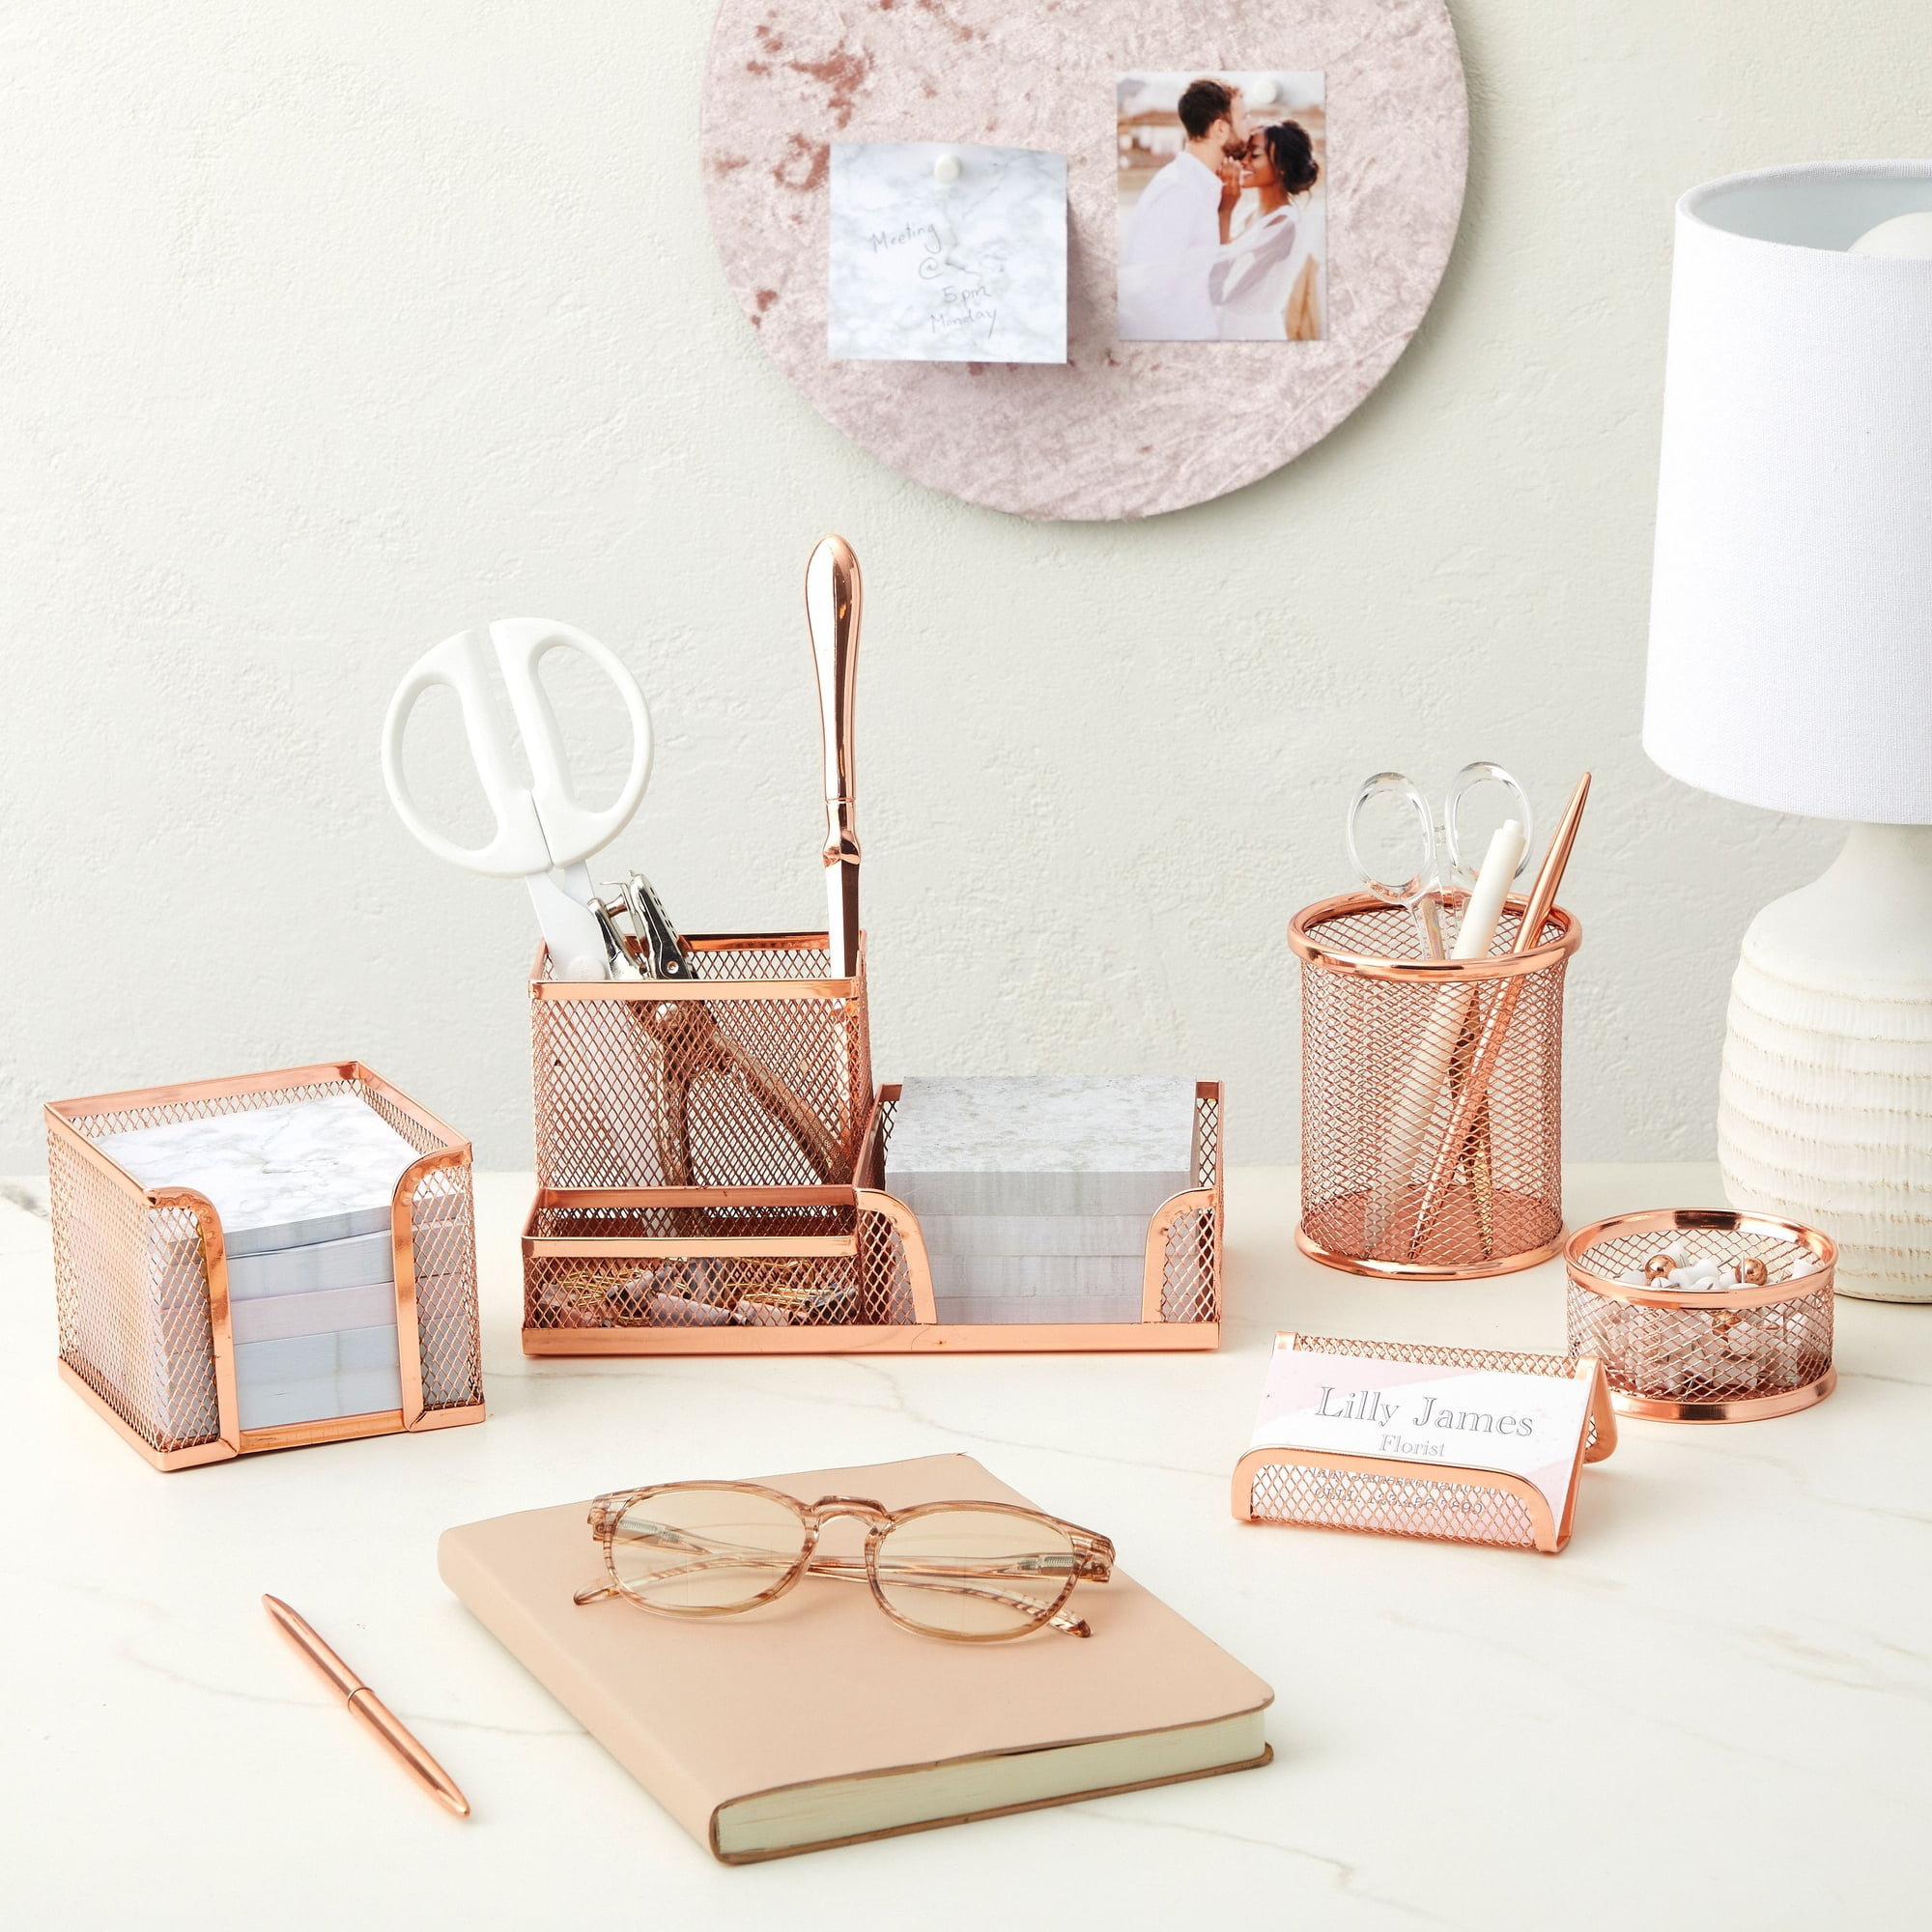  Rose Gold Desk Accessories for Women Office Decor, All in 1  Organizer 6C, File, Pen, Stationery, Rose Gold Office Supplies and  Accessories, Cute Rose Gold Desk Organizer,Gold office supplies for women 